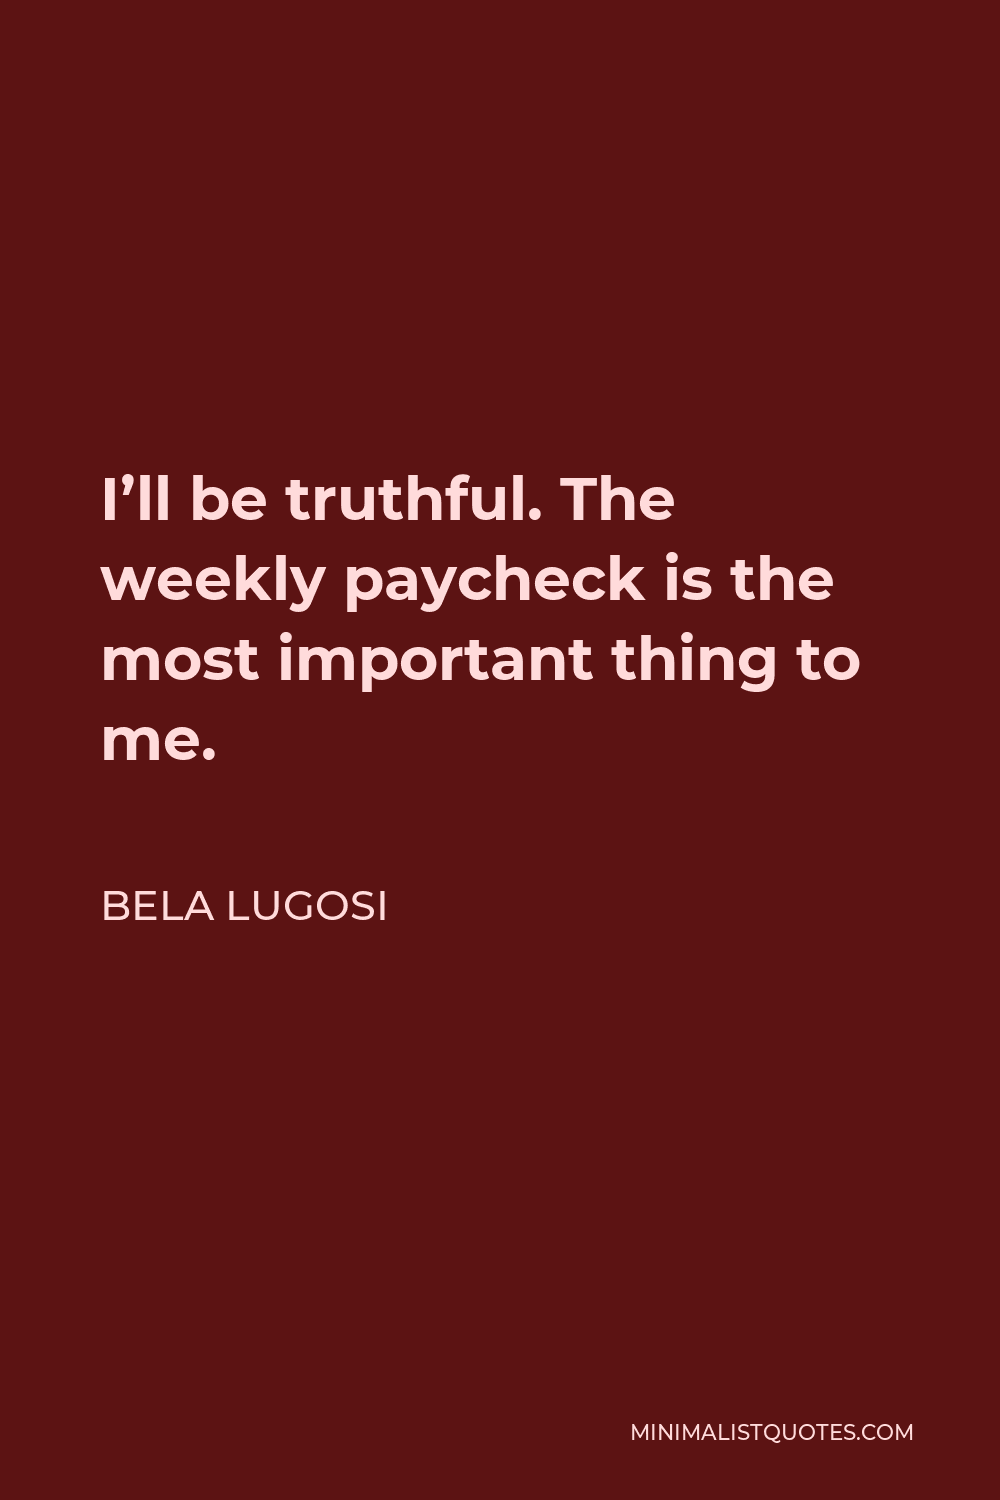 Bela Lugosi Quote - I’ll be truthful. The weekly paycheck is the most important thing to me.